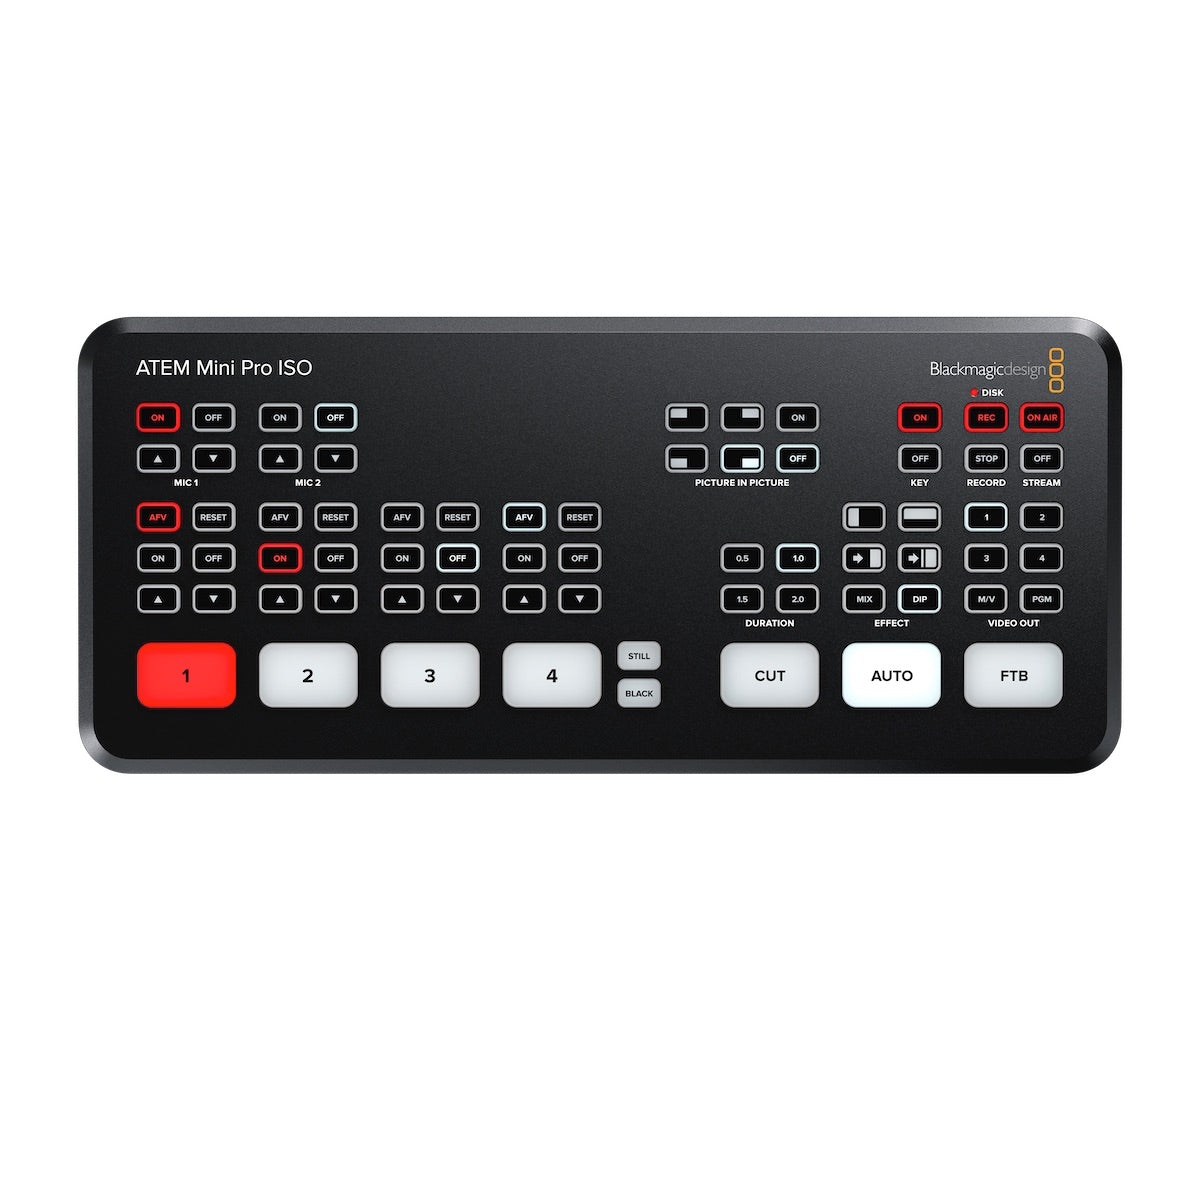 Blackmagic ATEM Mini Pro ISO - Live Production Switcher for Streaming, top